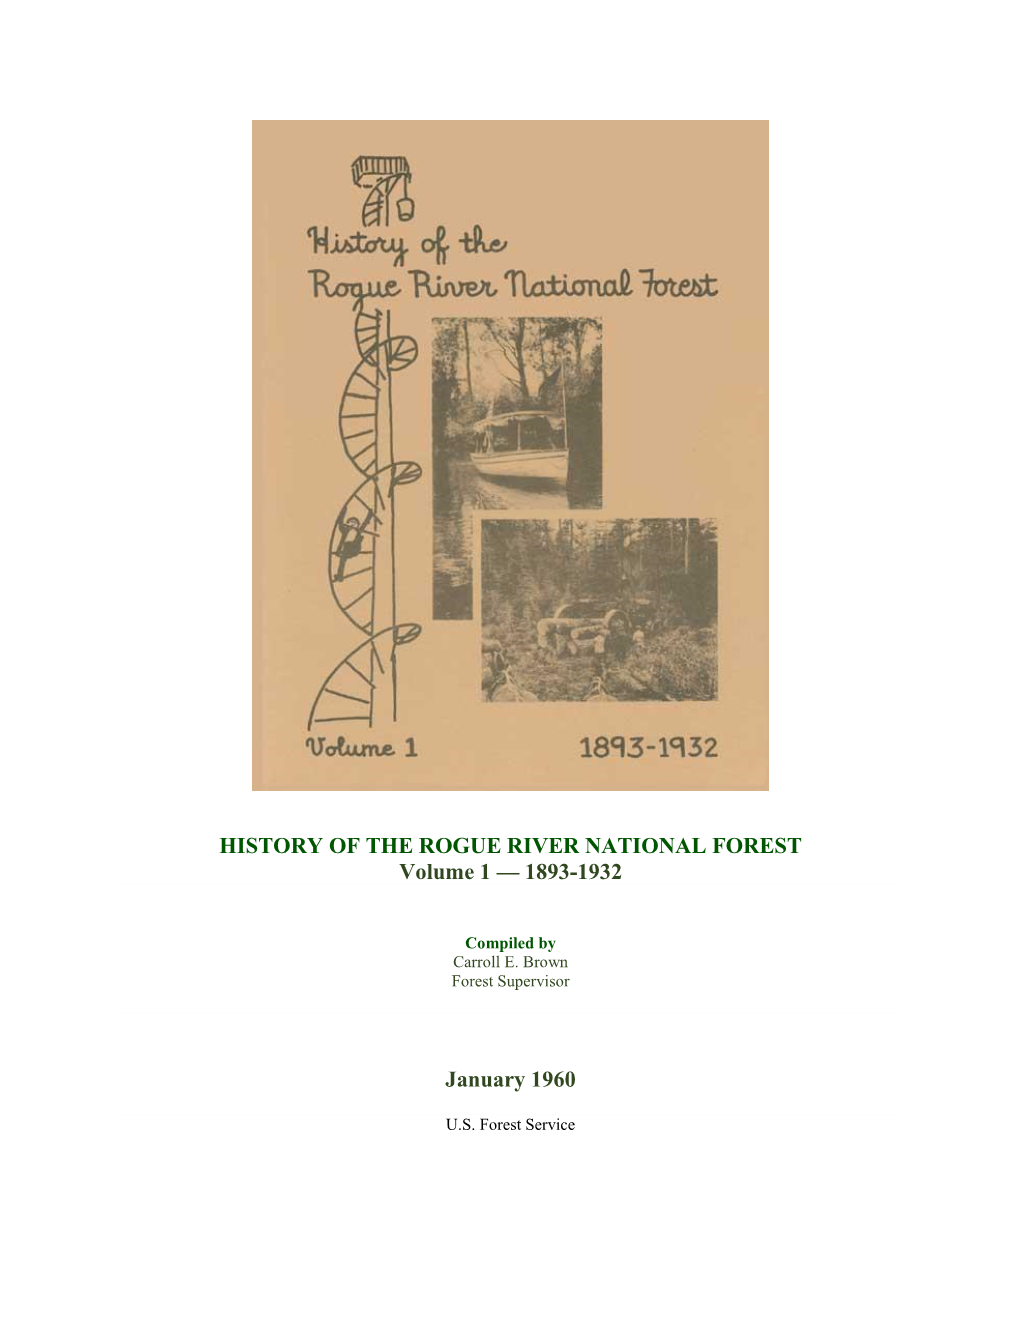 HISTORY of the ROGUE RIVER NATIONAL FOREST Volume 1 — 1893-1932